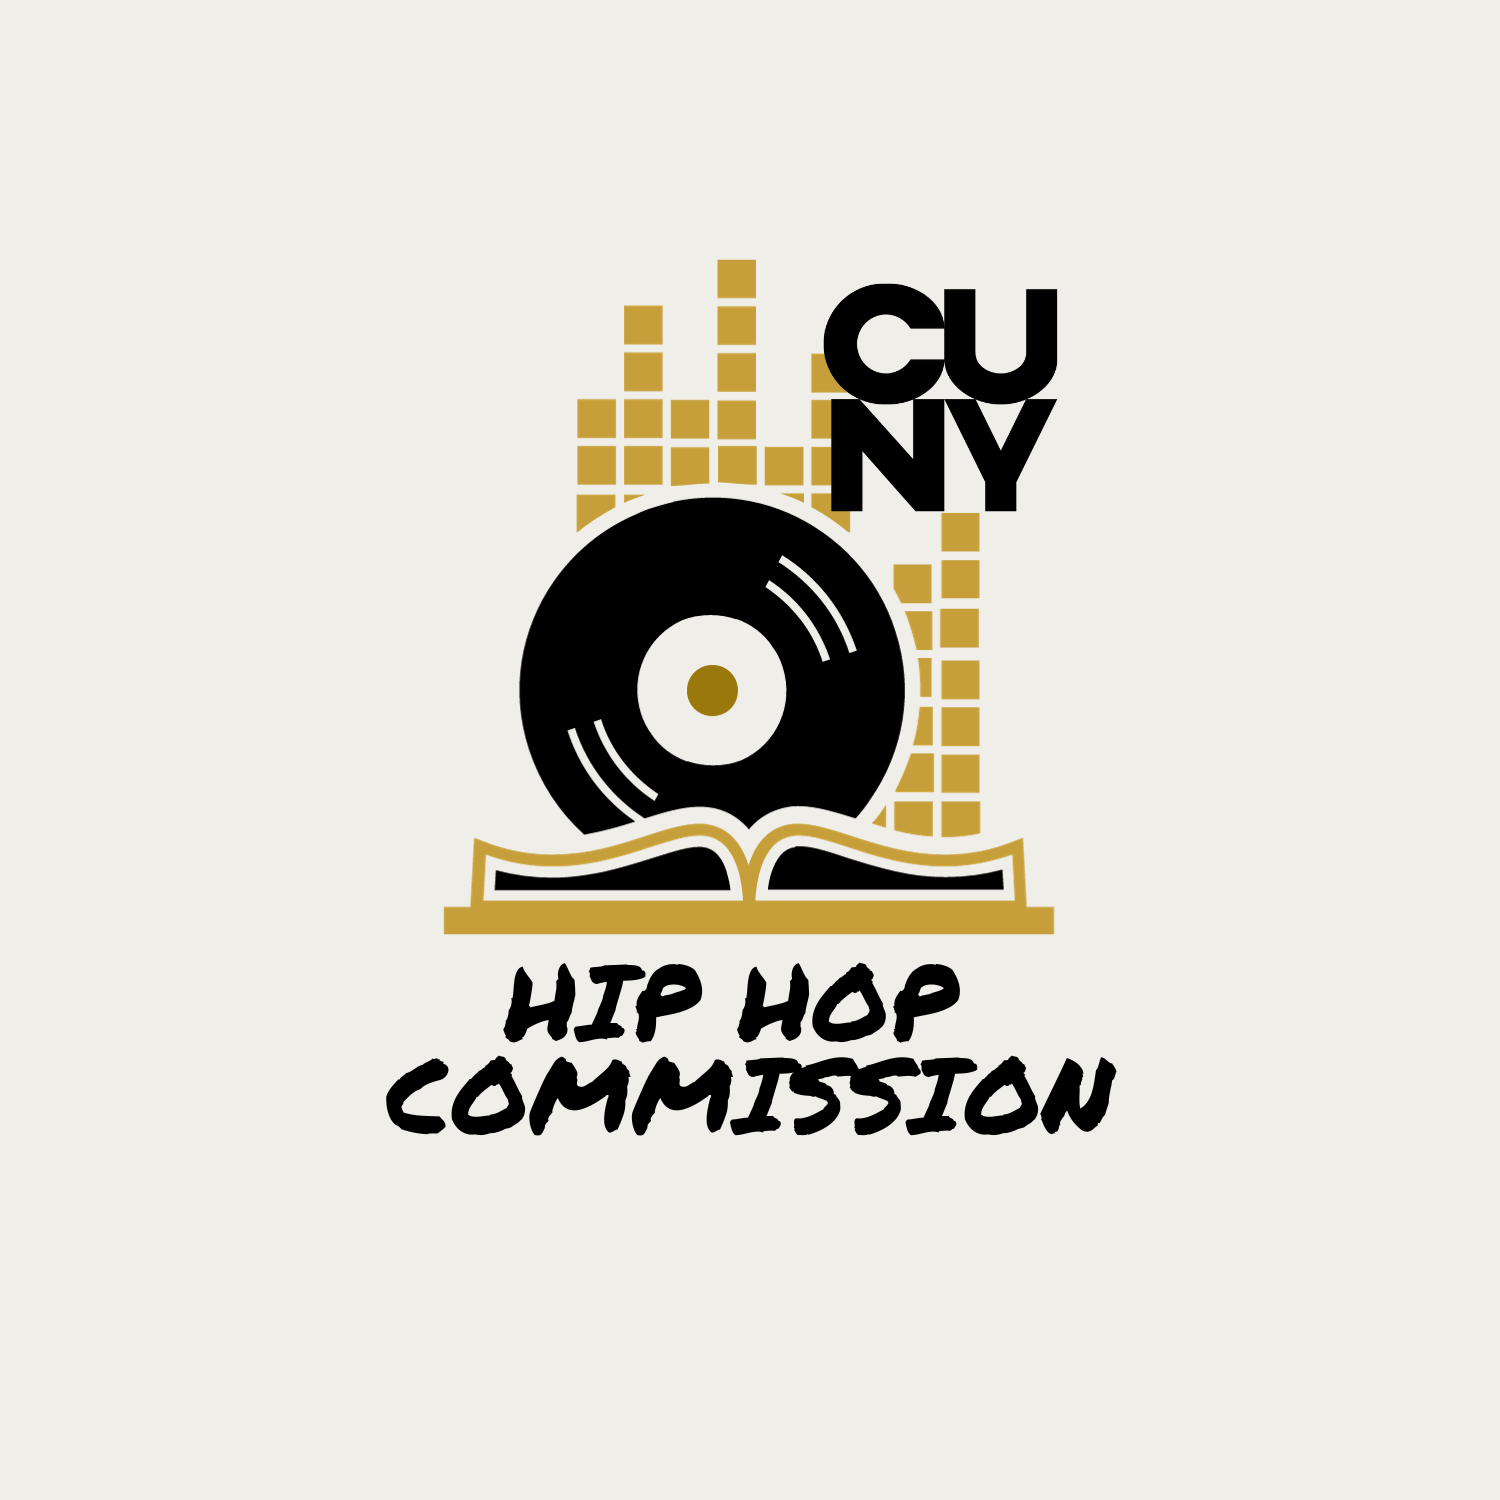 CUNY Hip Hop Commission Conference